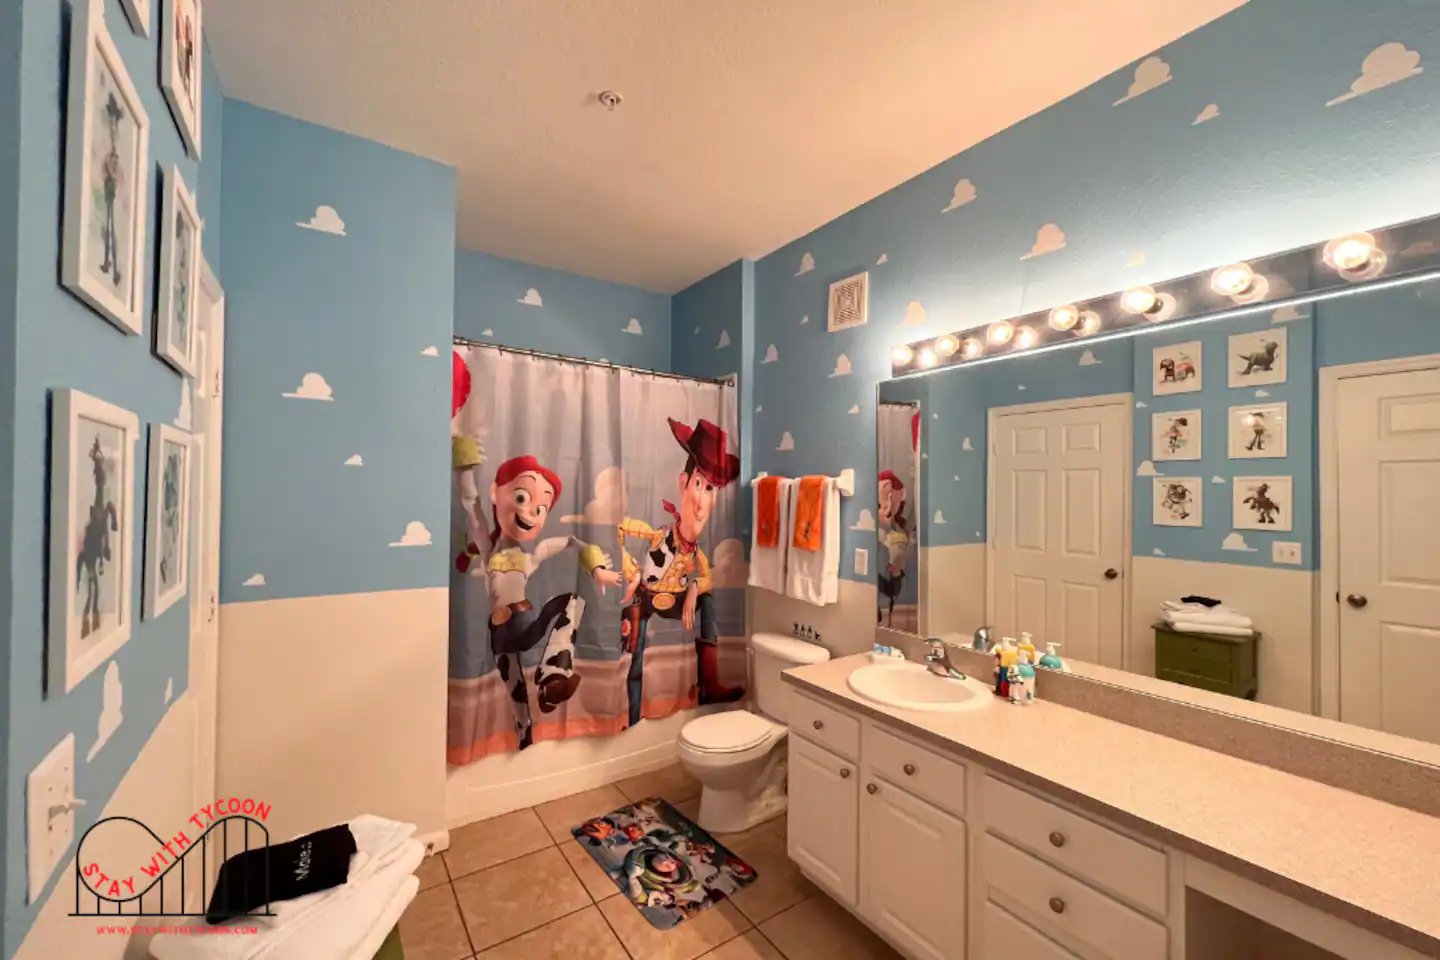 The Toy Story restroom is shared with the Harry Potter and Star Wars rooms!